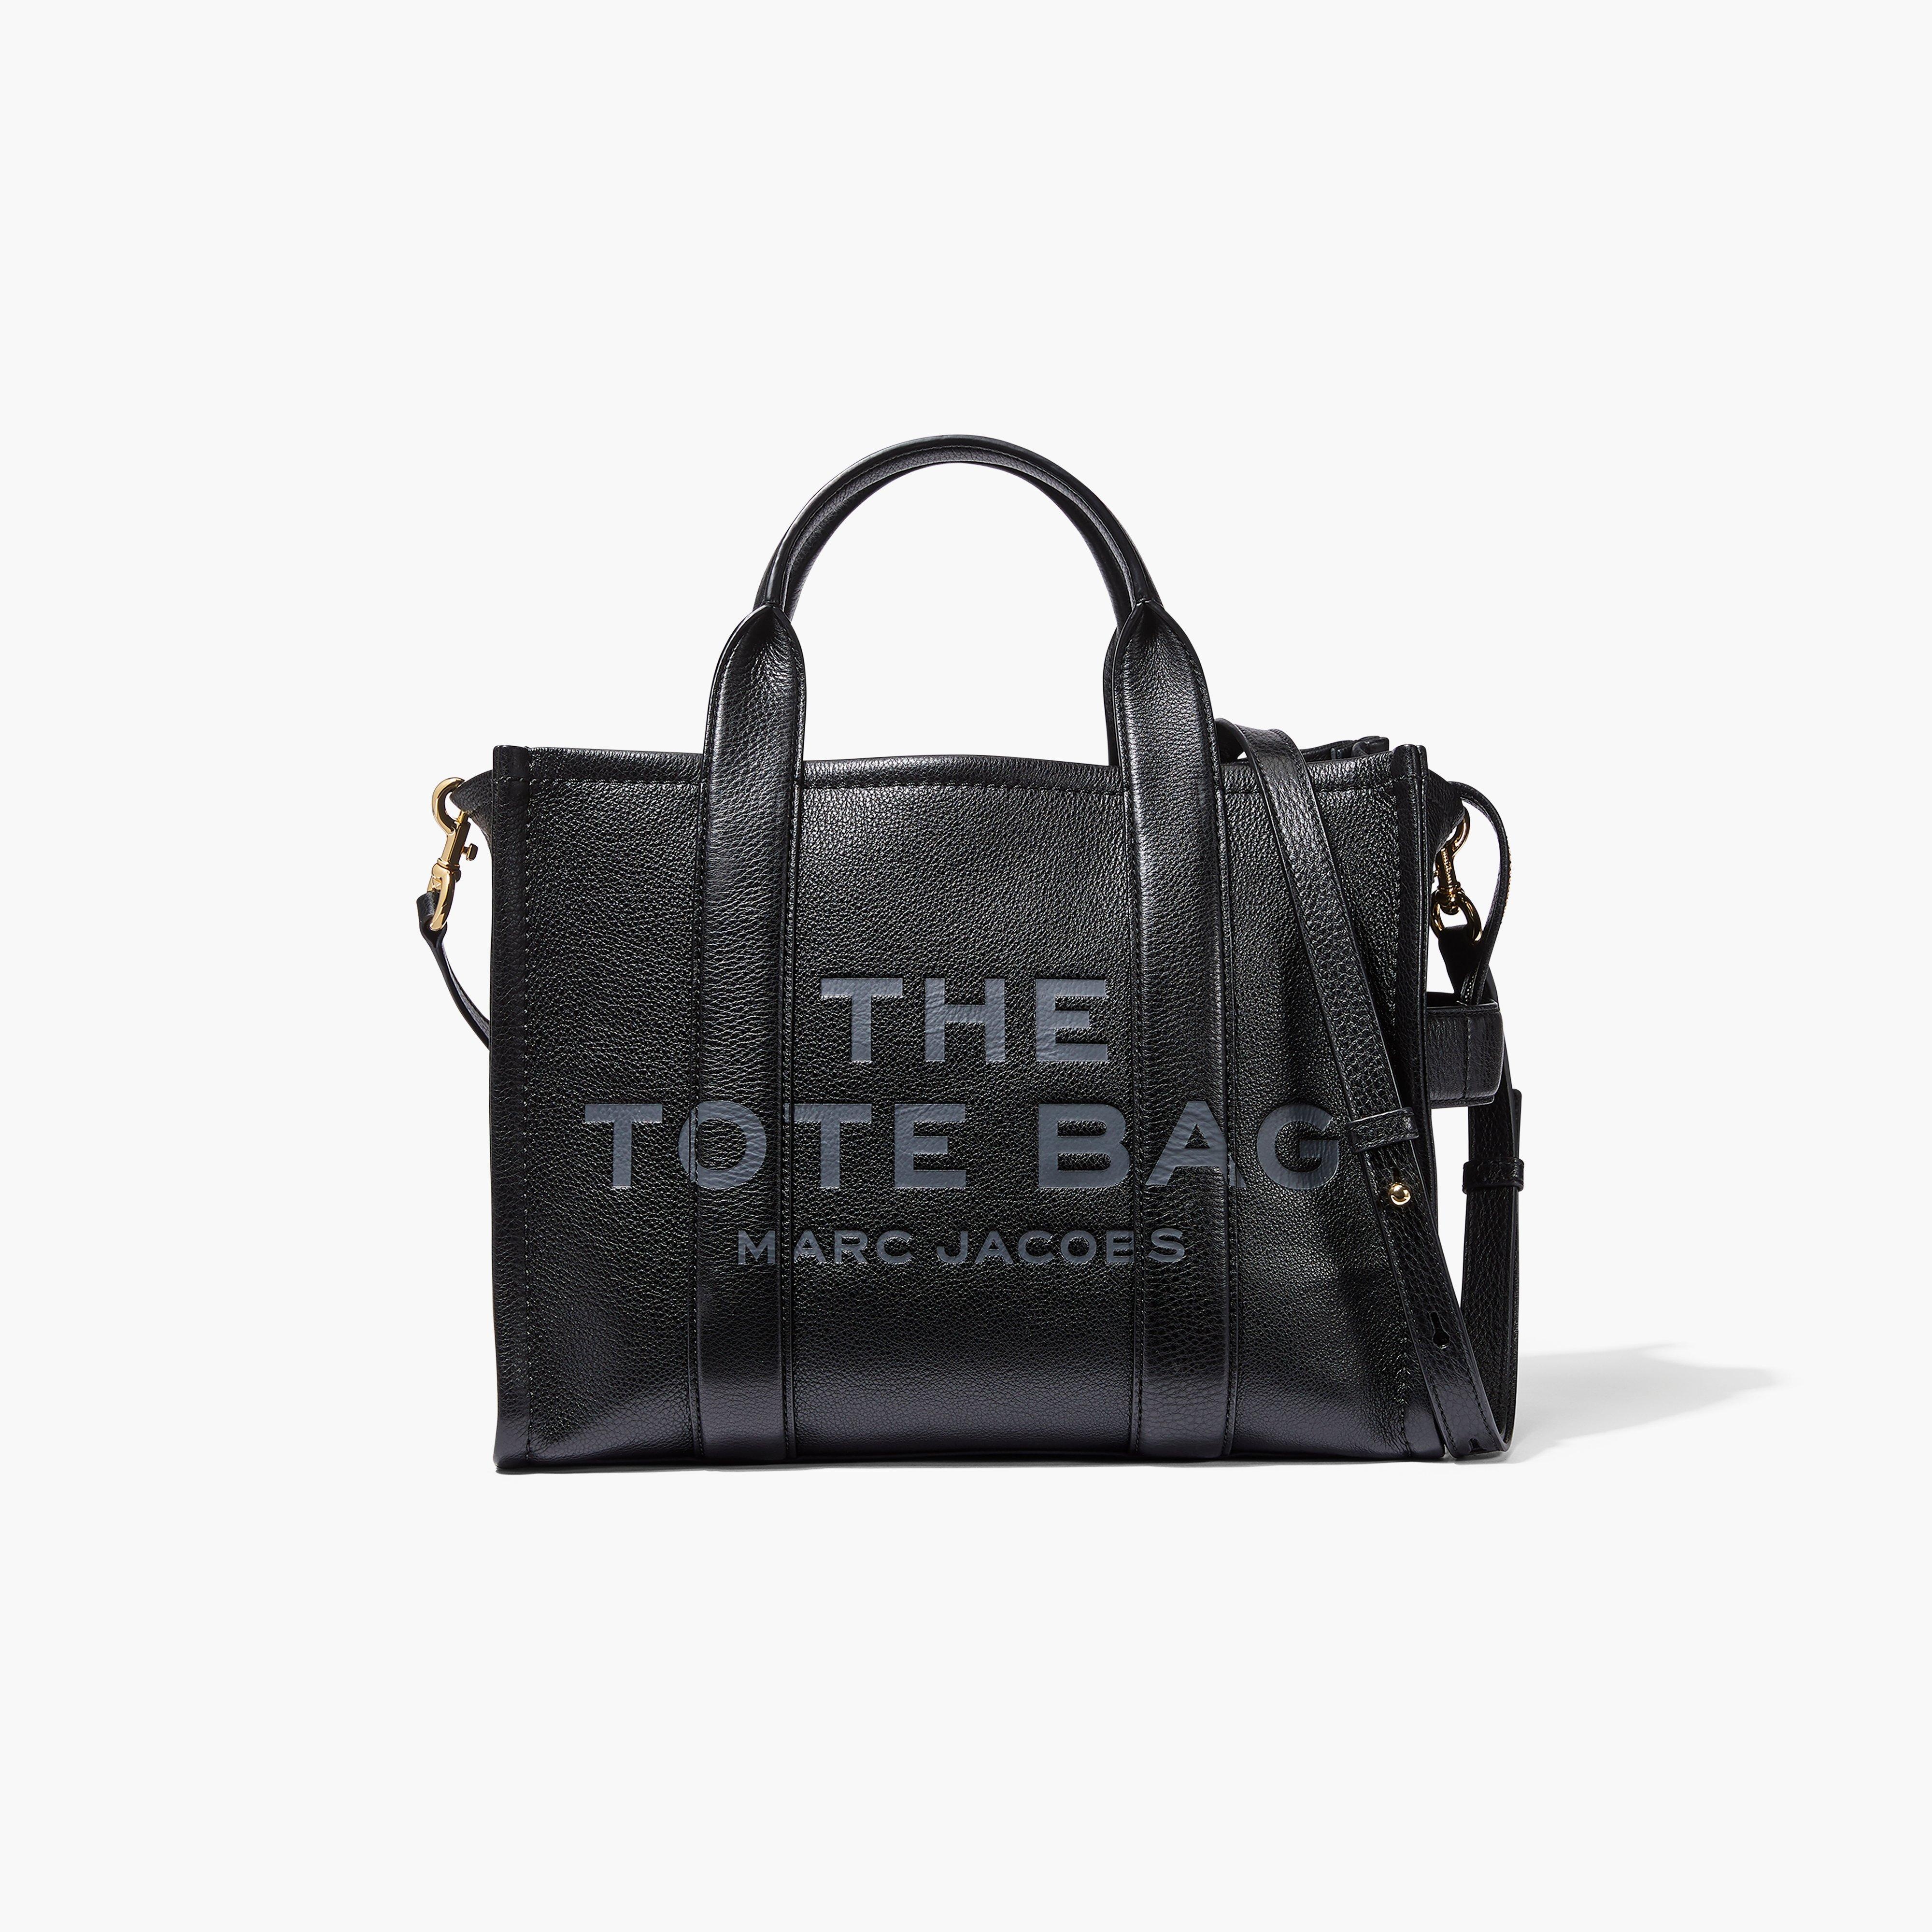 THE LEATHER SMALL TOTE BAG - 1